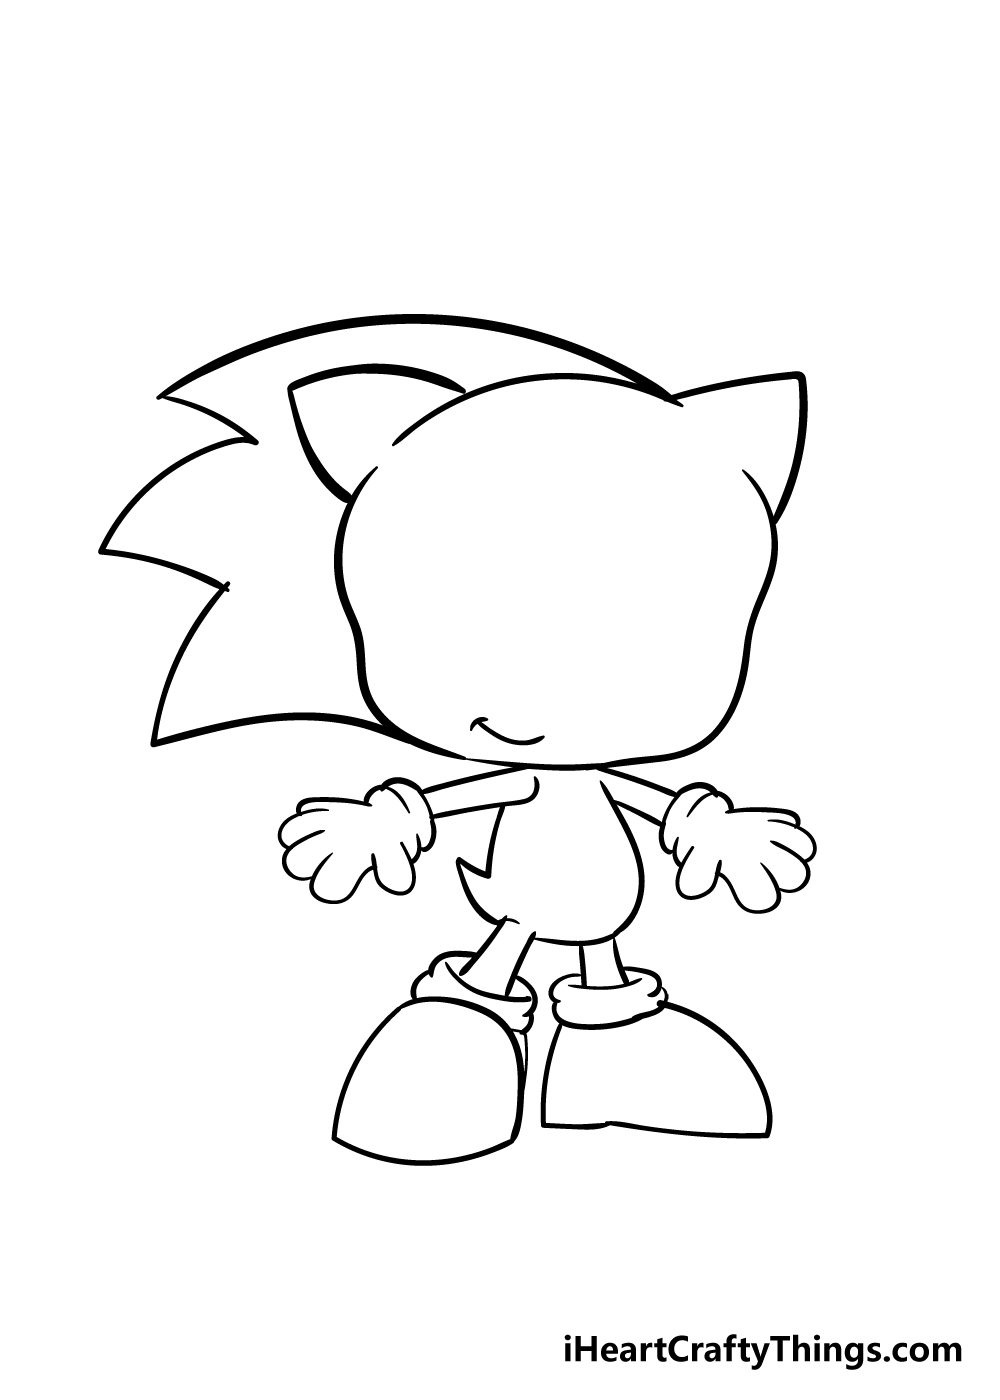 sonic drawing step 6